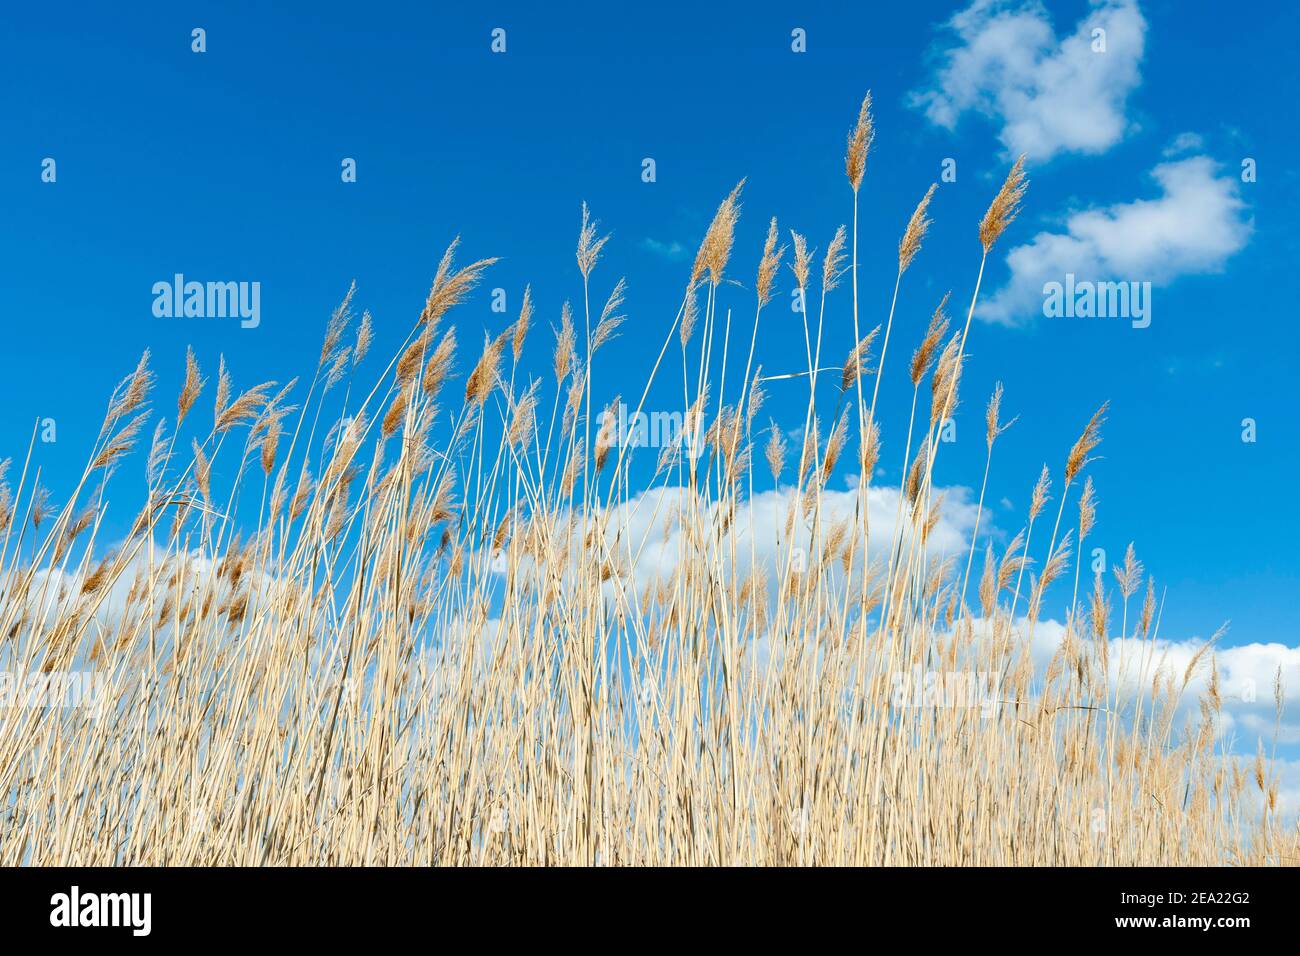 Common reed (Phragmites communis) or reed in front of blue sky with cumulus clouds, Thuringia, Germany Stock Photo